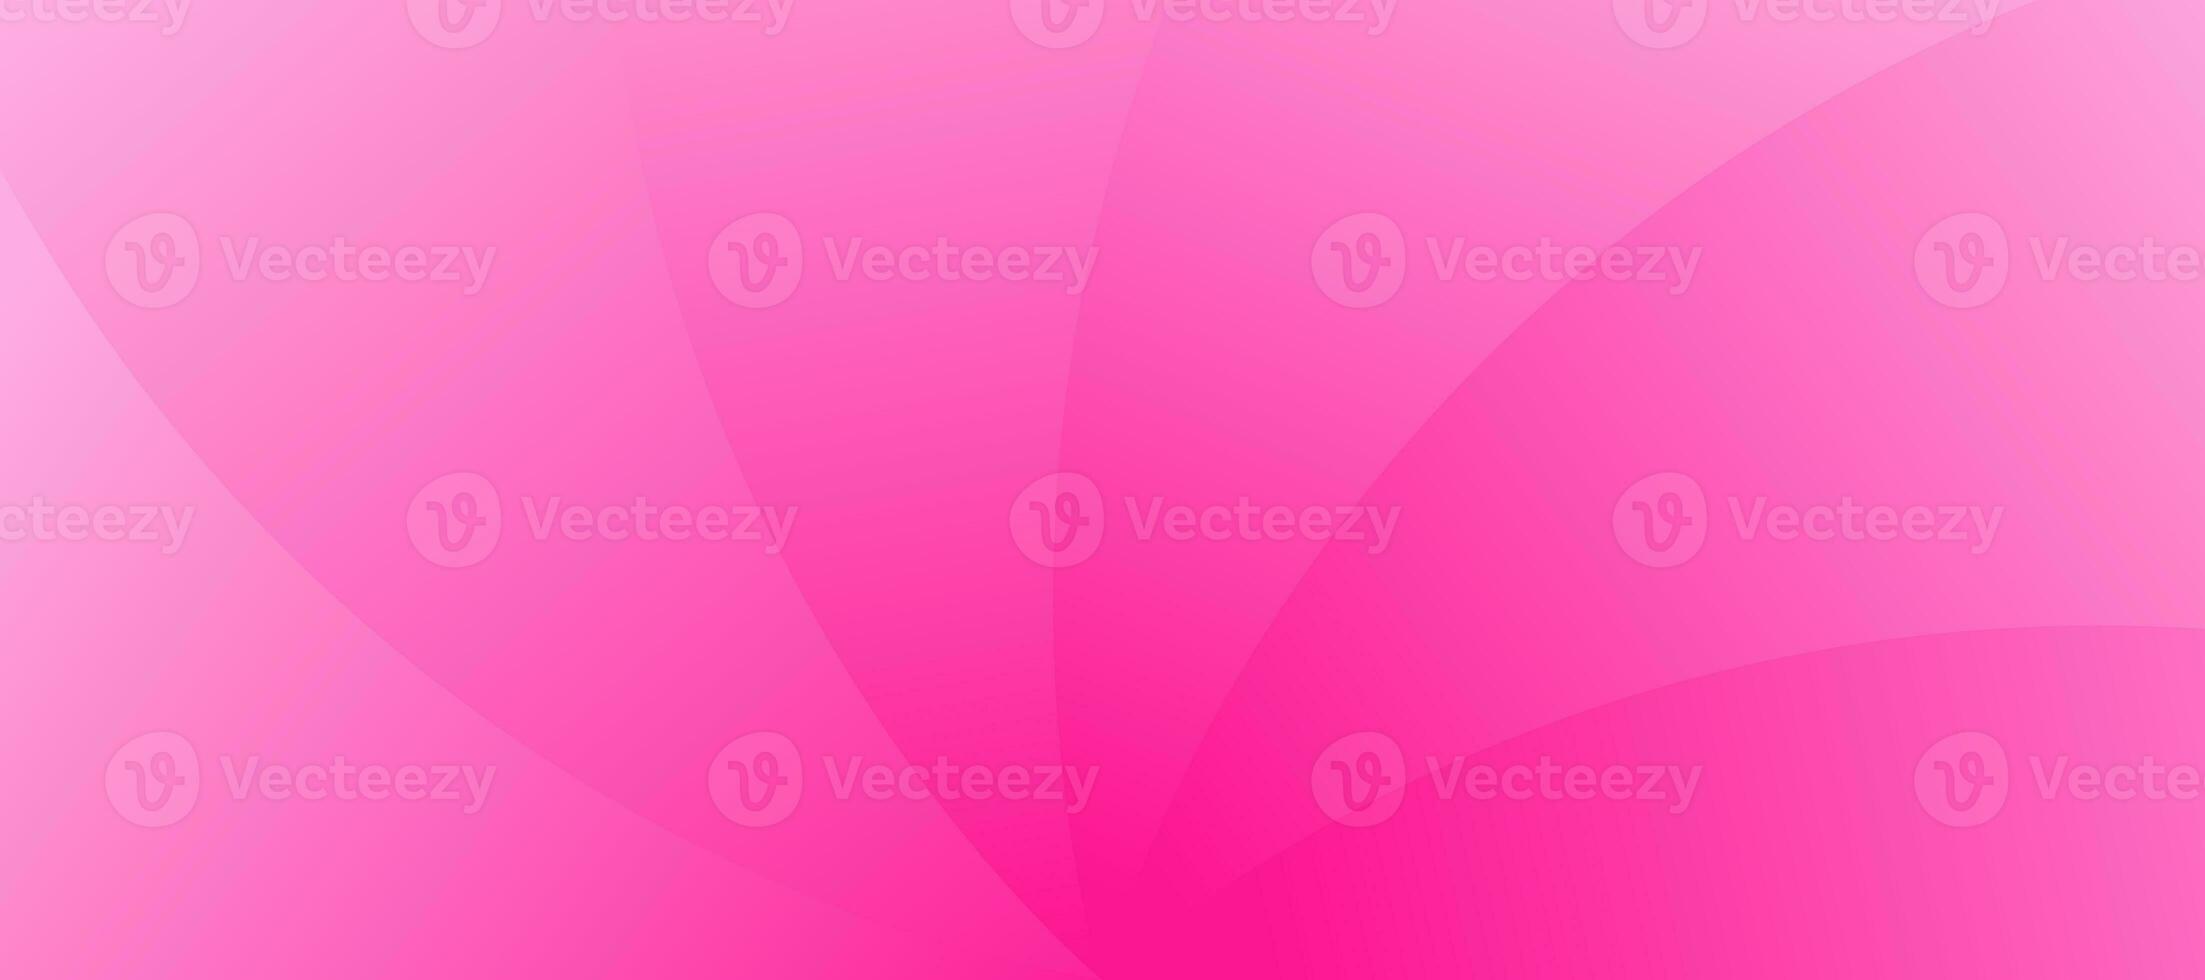 Modern abstract pink background with elegant elements vector illustration photo